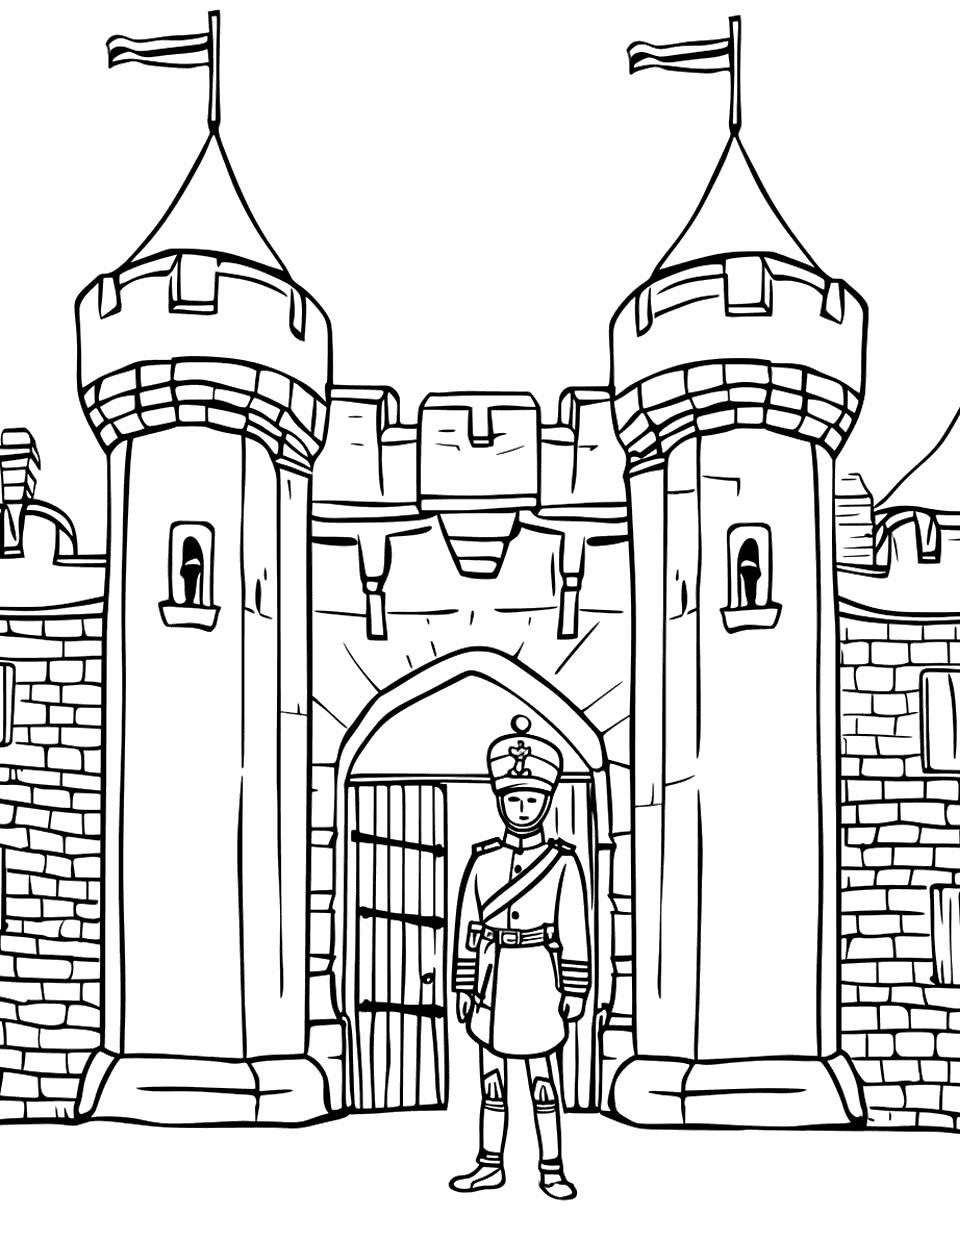 Royal Guard Duty Castle Coloring Page - A royal guard standing at attention at the castle entrance.